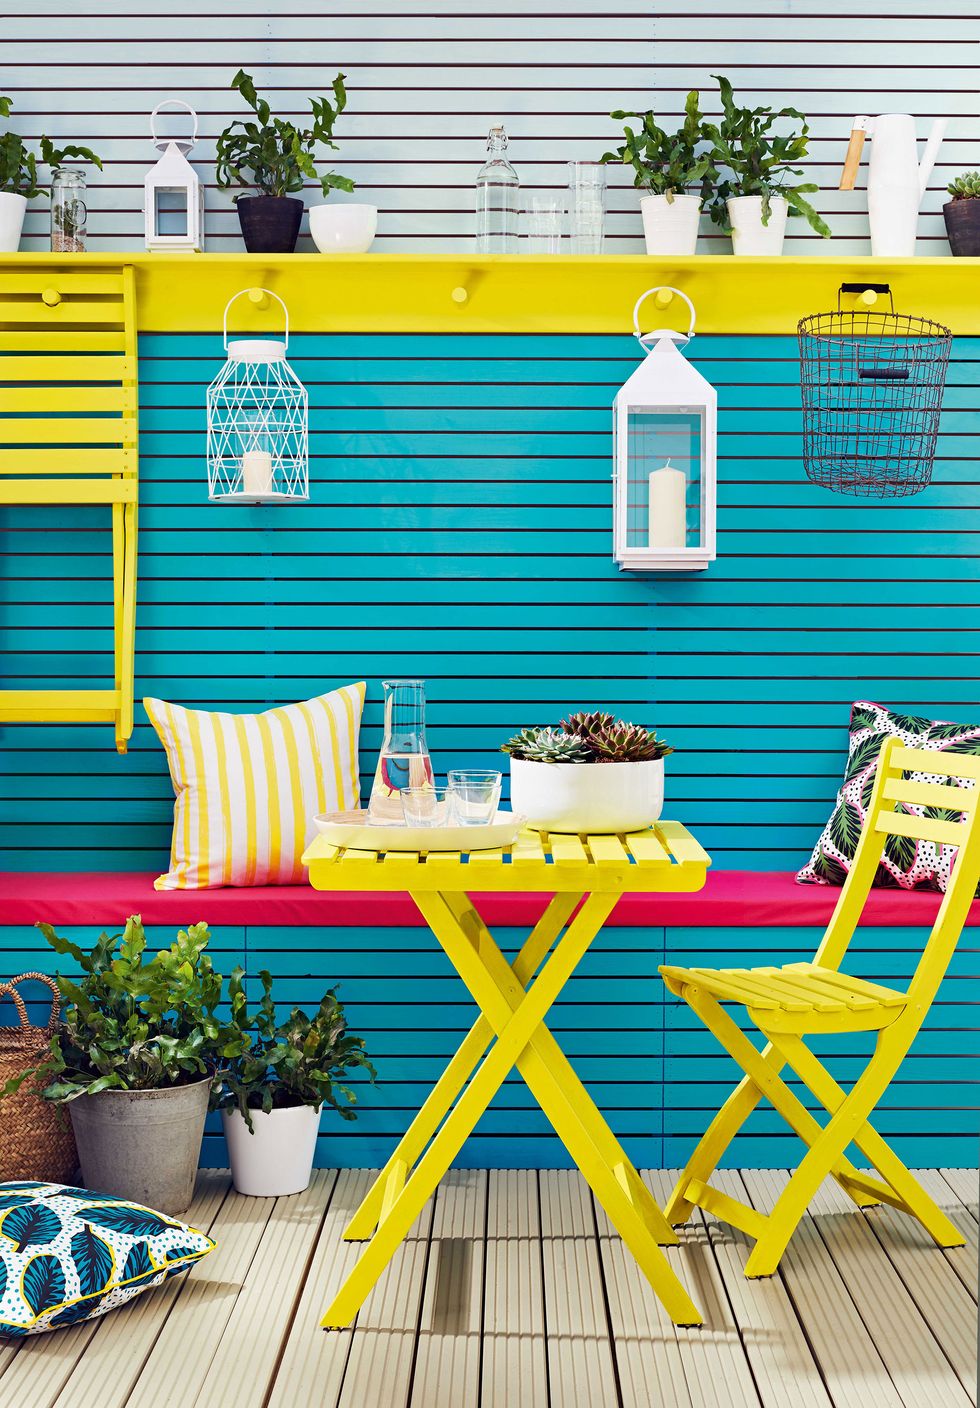 Outdoor hacks for small spaces